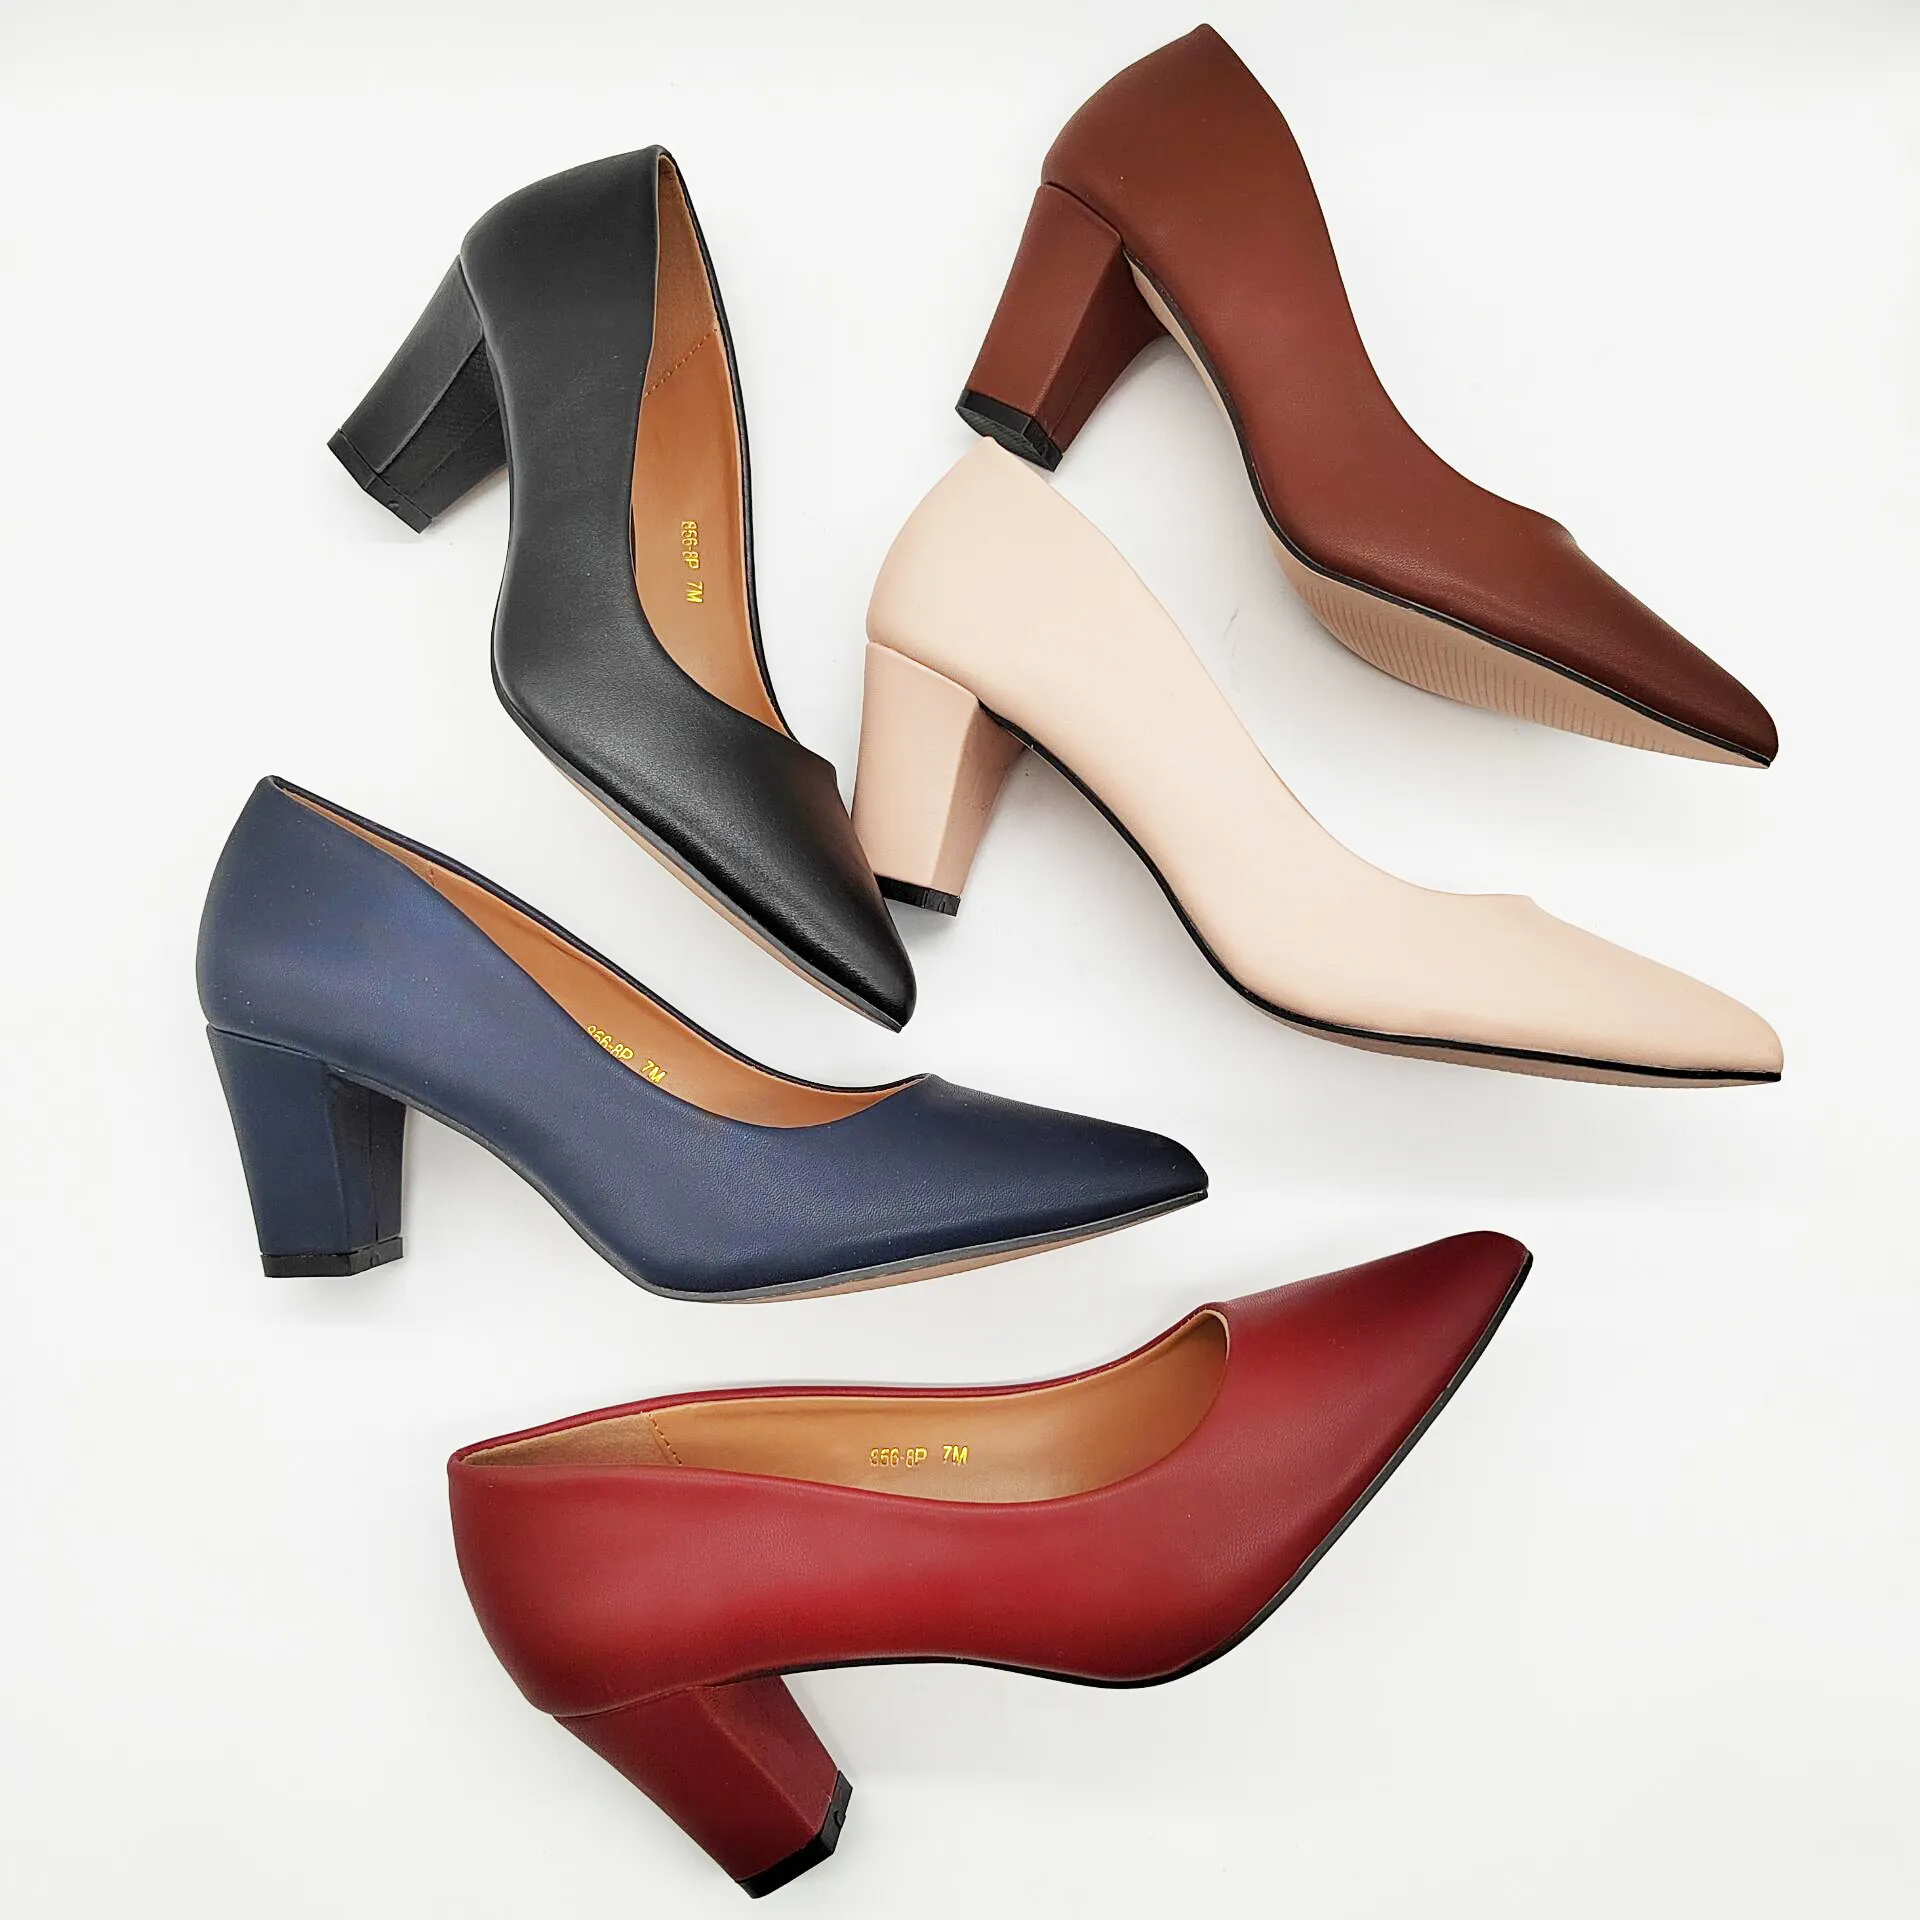 Comfortable closed pointed toe chunky block heel pumps high heels for women sexy elegant formal work office ladies dress shoes